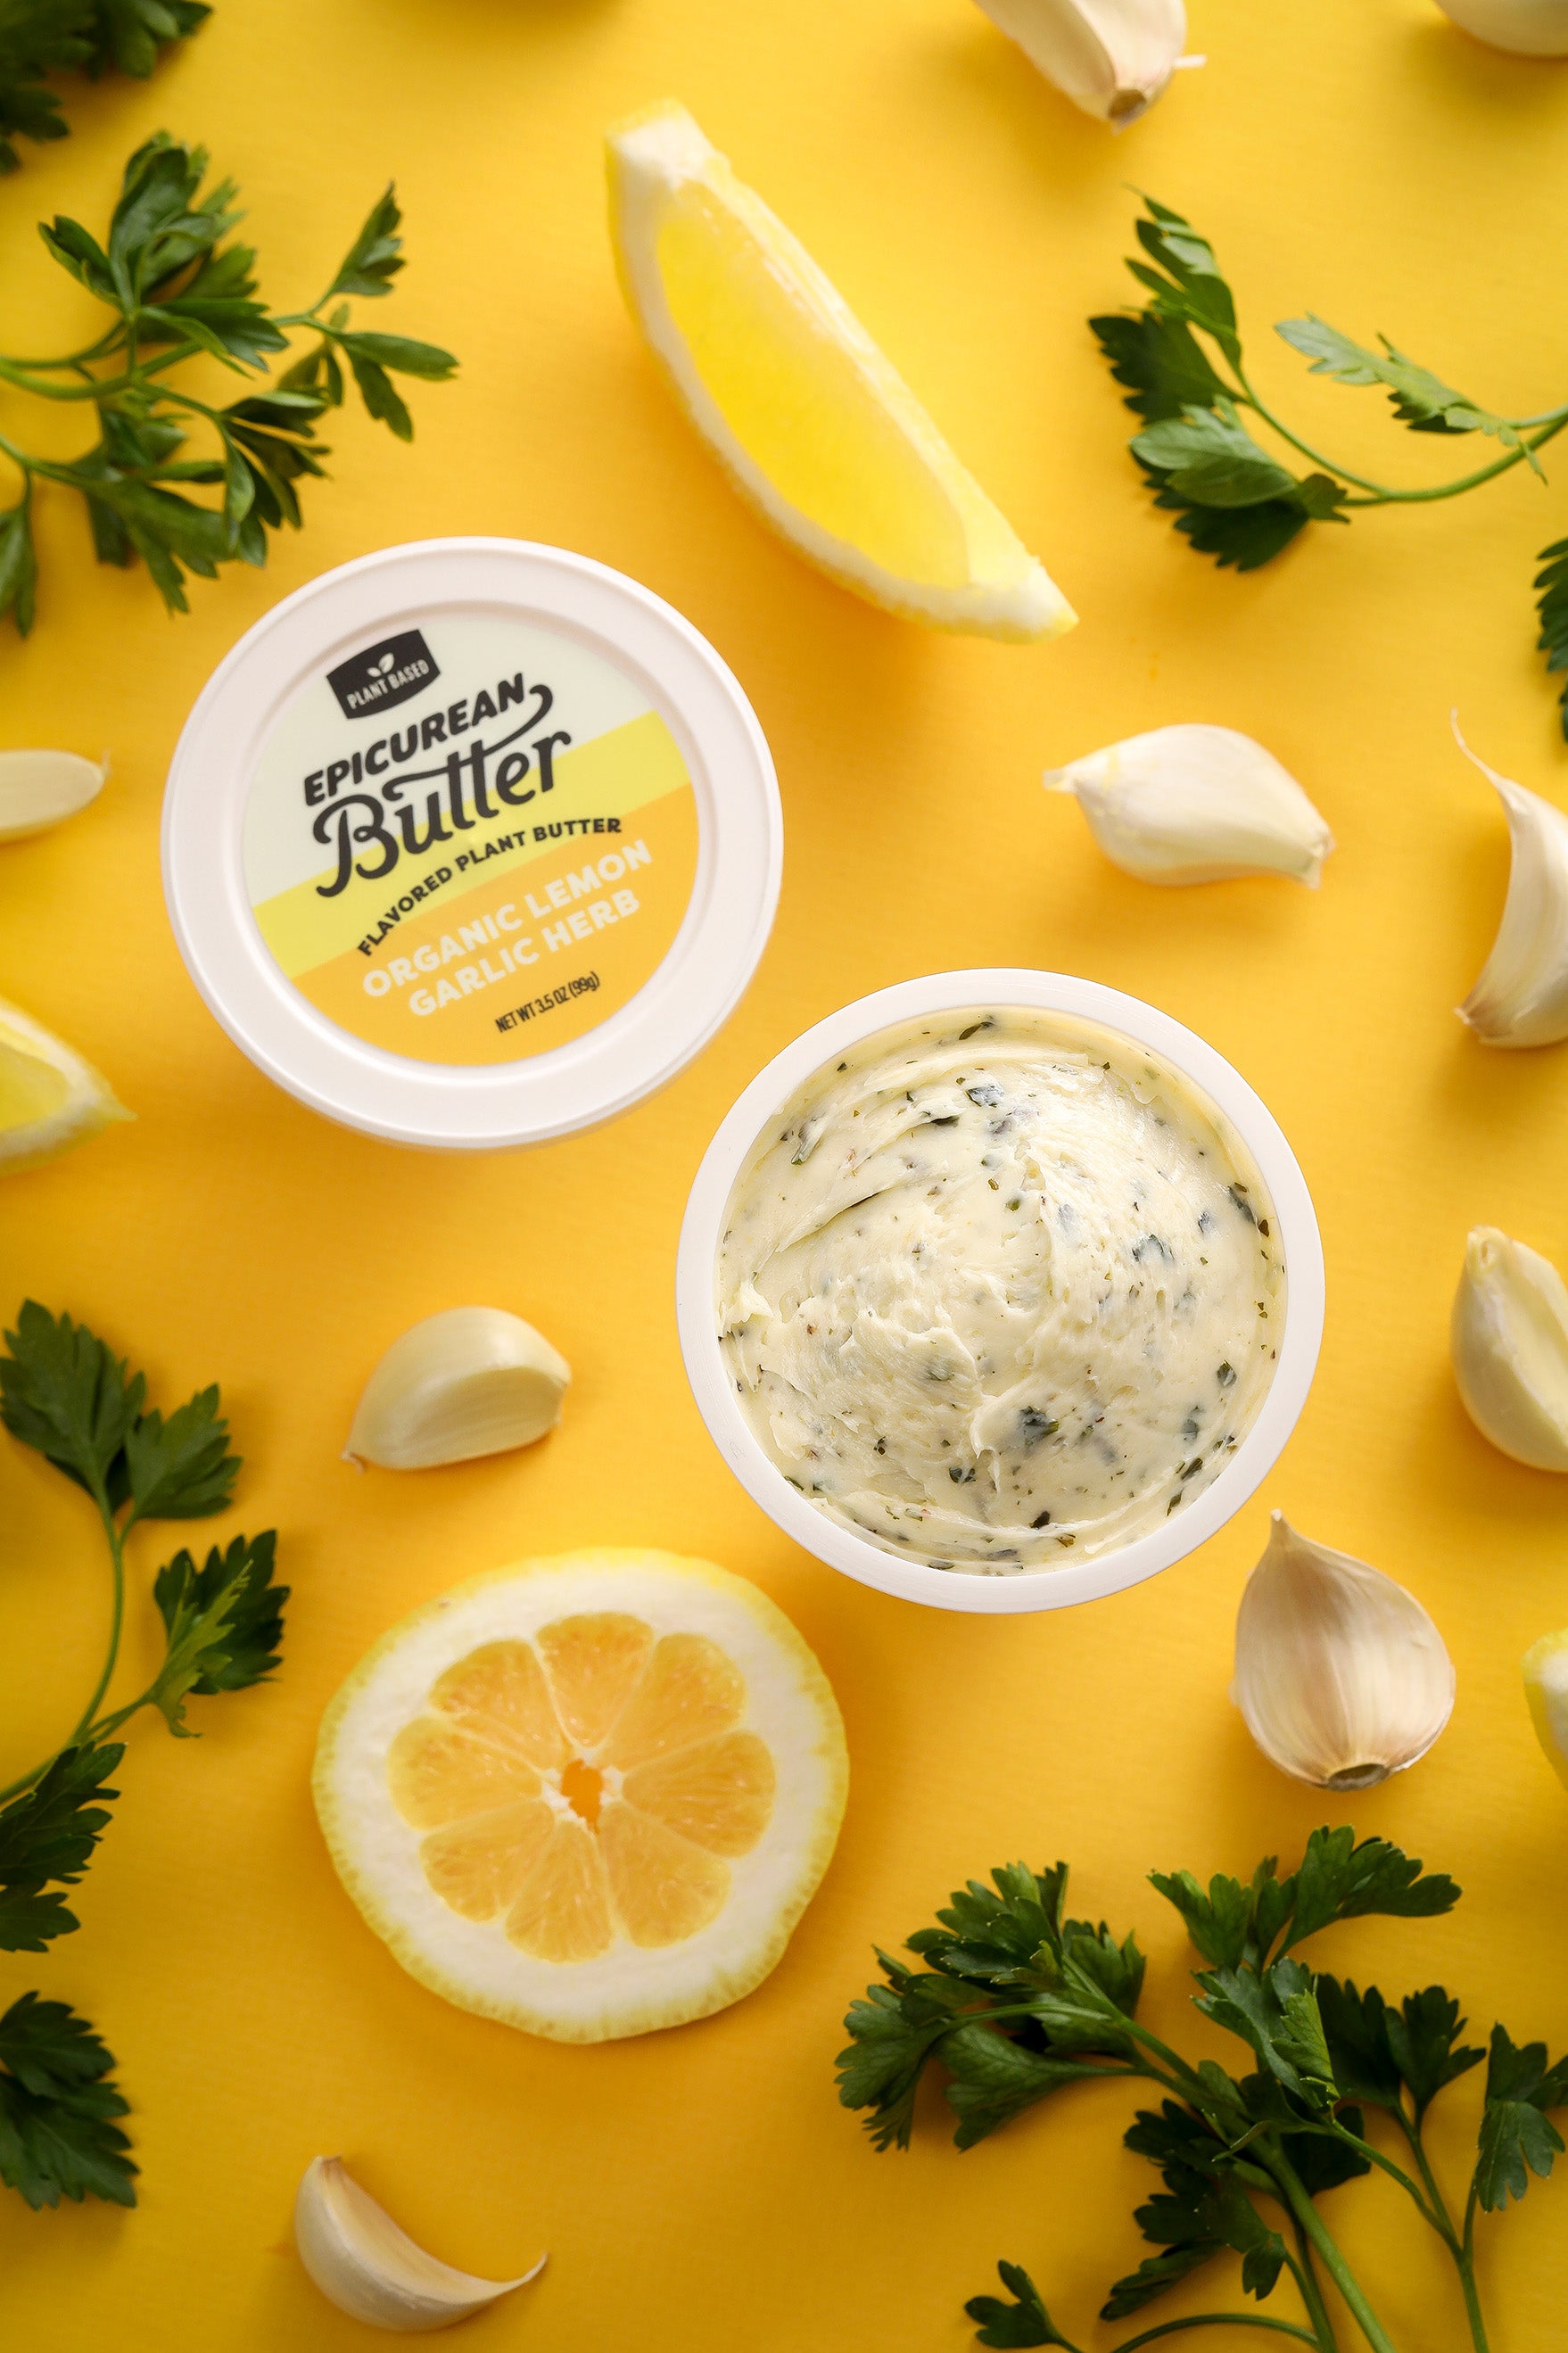 Organic Lemon Garlic Herb Flavored Plant Butter tub with ingredients